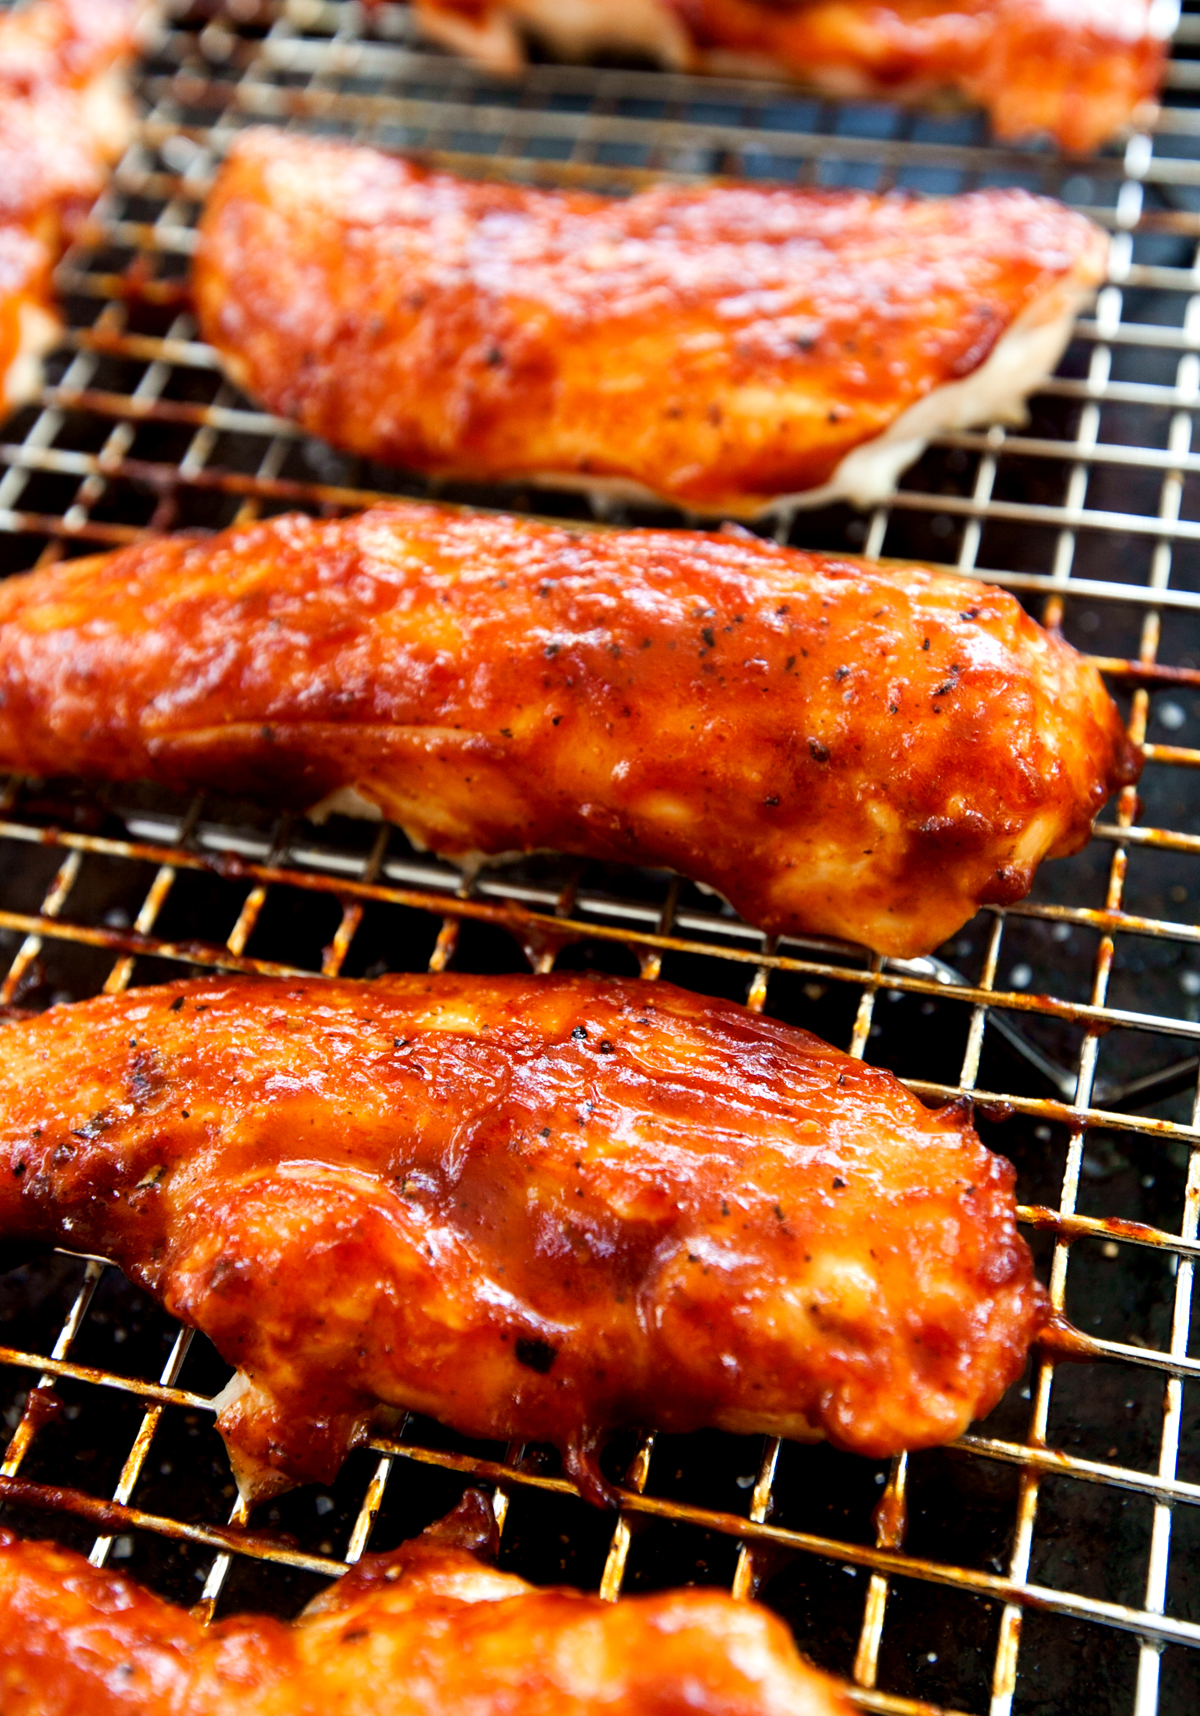 A close up view of juicy caramelized baked BBQ chicken tenders with spicy barbecue sauce.